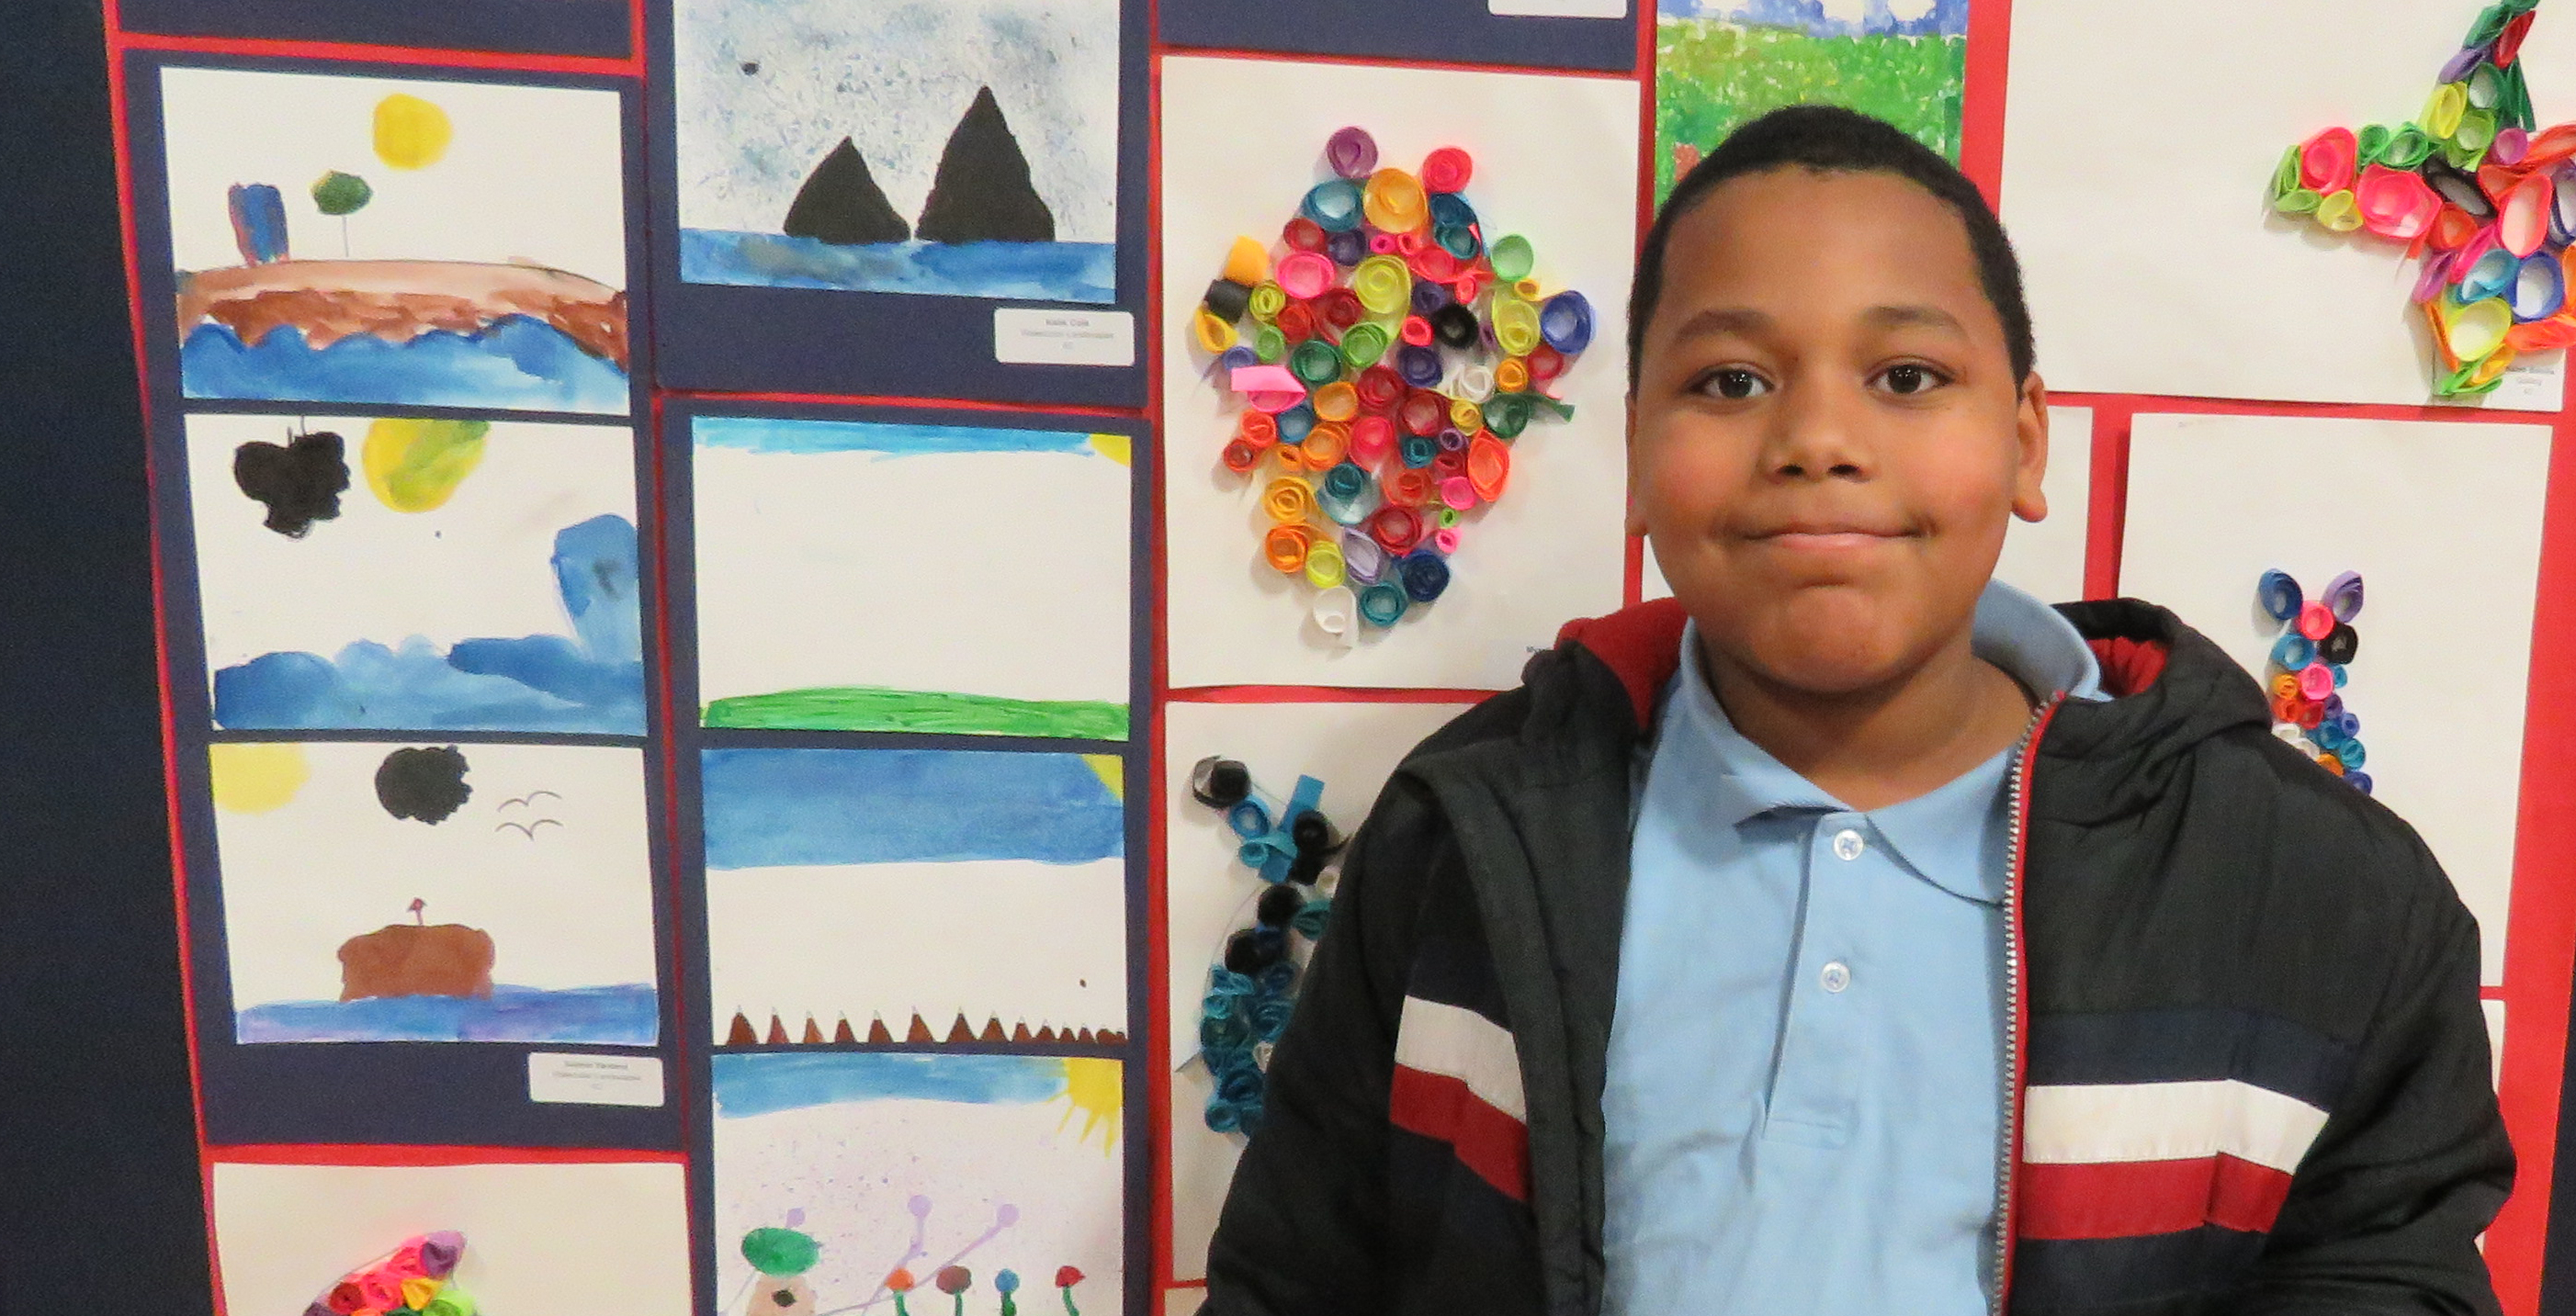 Syracuse Academy of Science Elementary School Student Presents Artwork During Winter Art Show